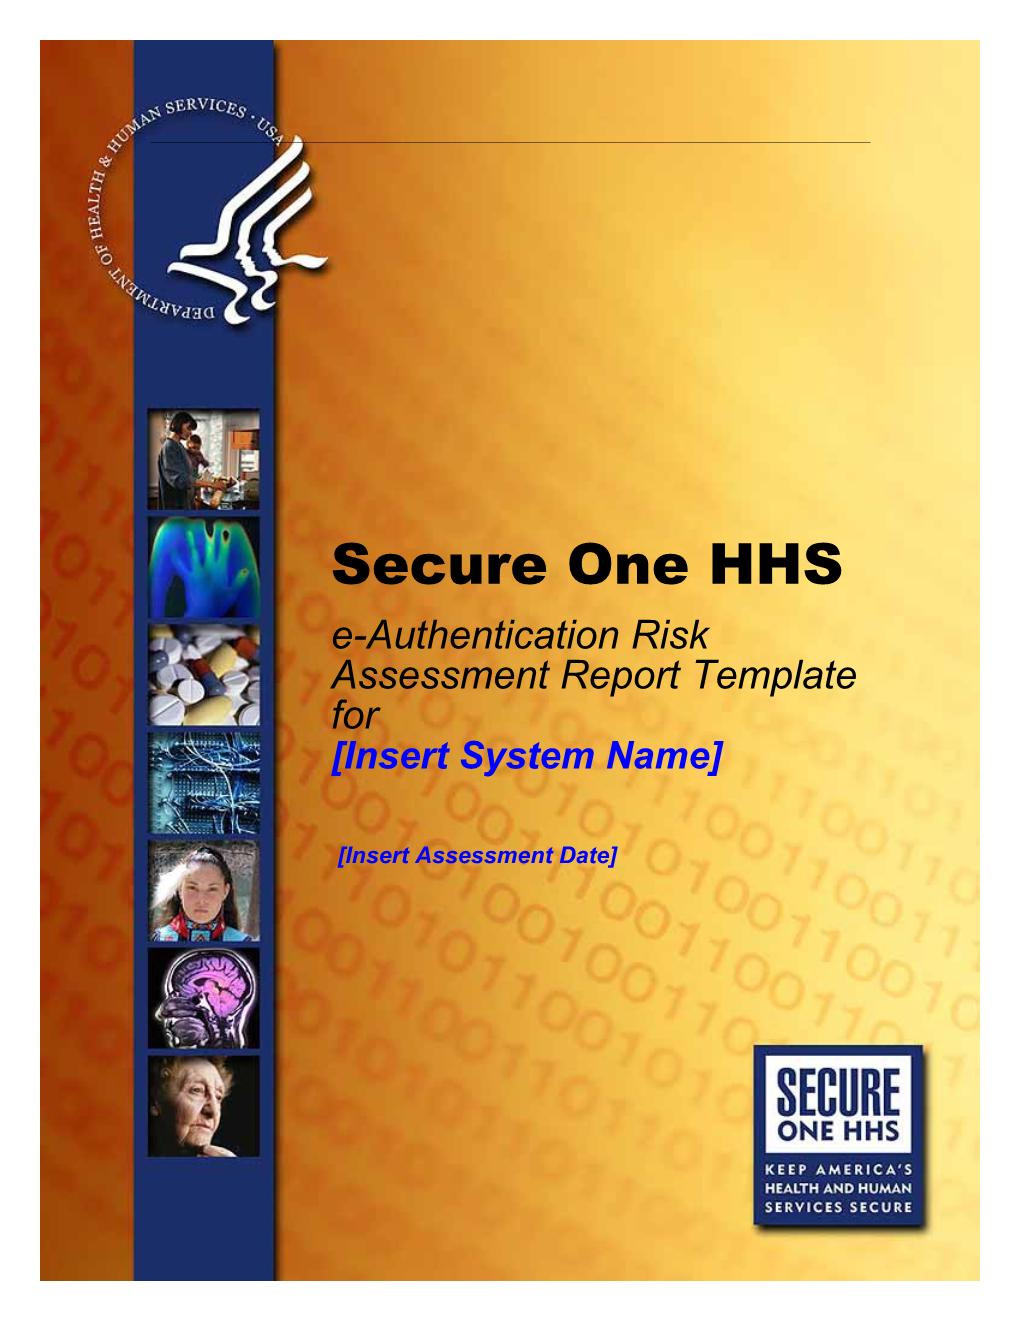 HHS Information Technology Security Program